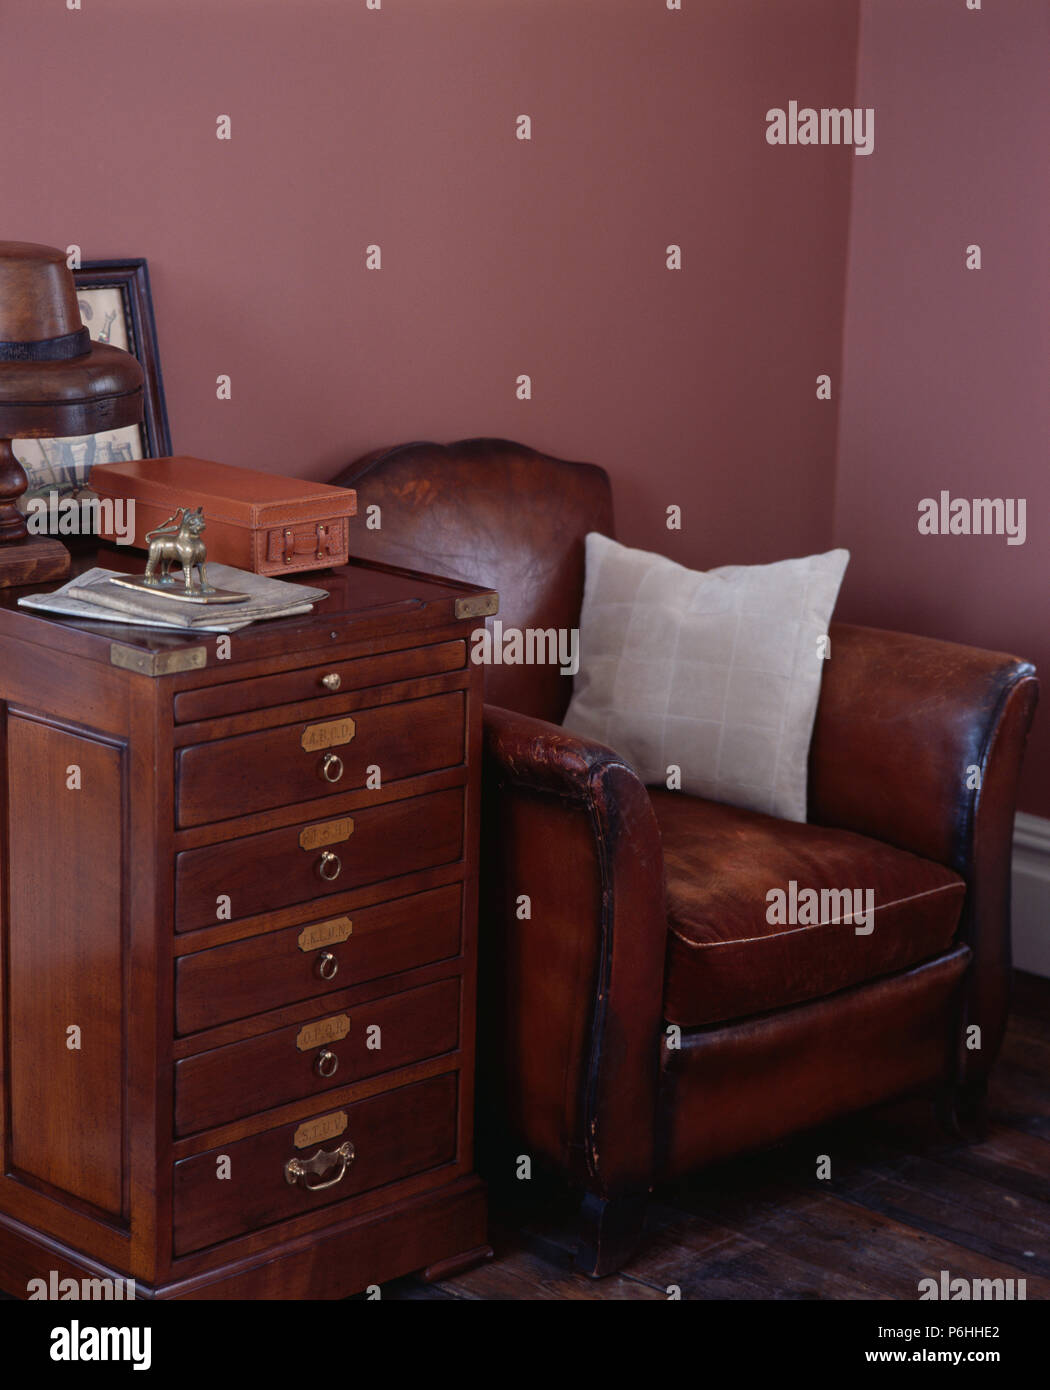 Old Wooden Filing Cabinet And Brown Leather Armchair In Study